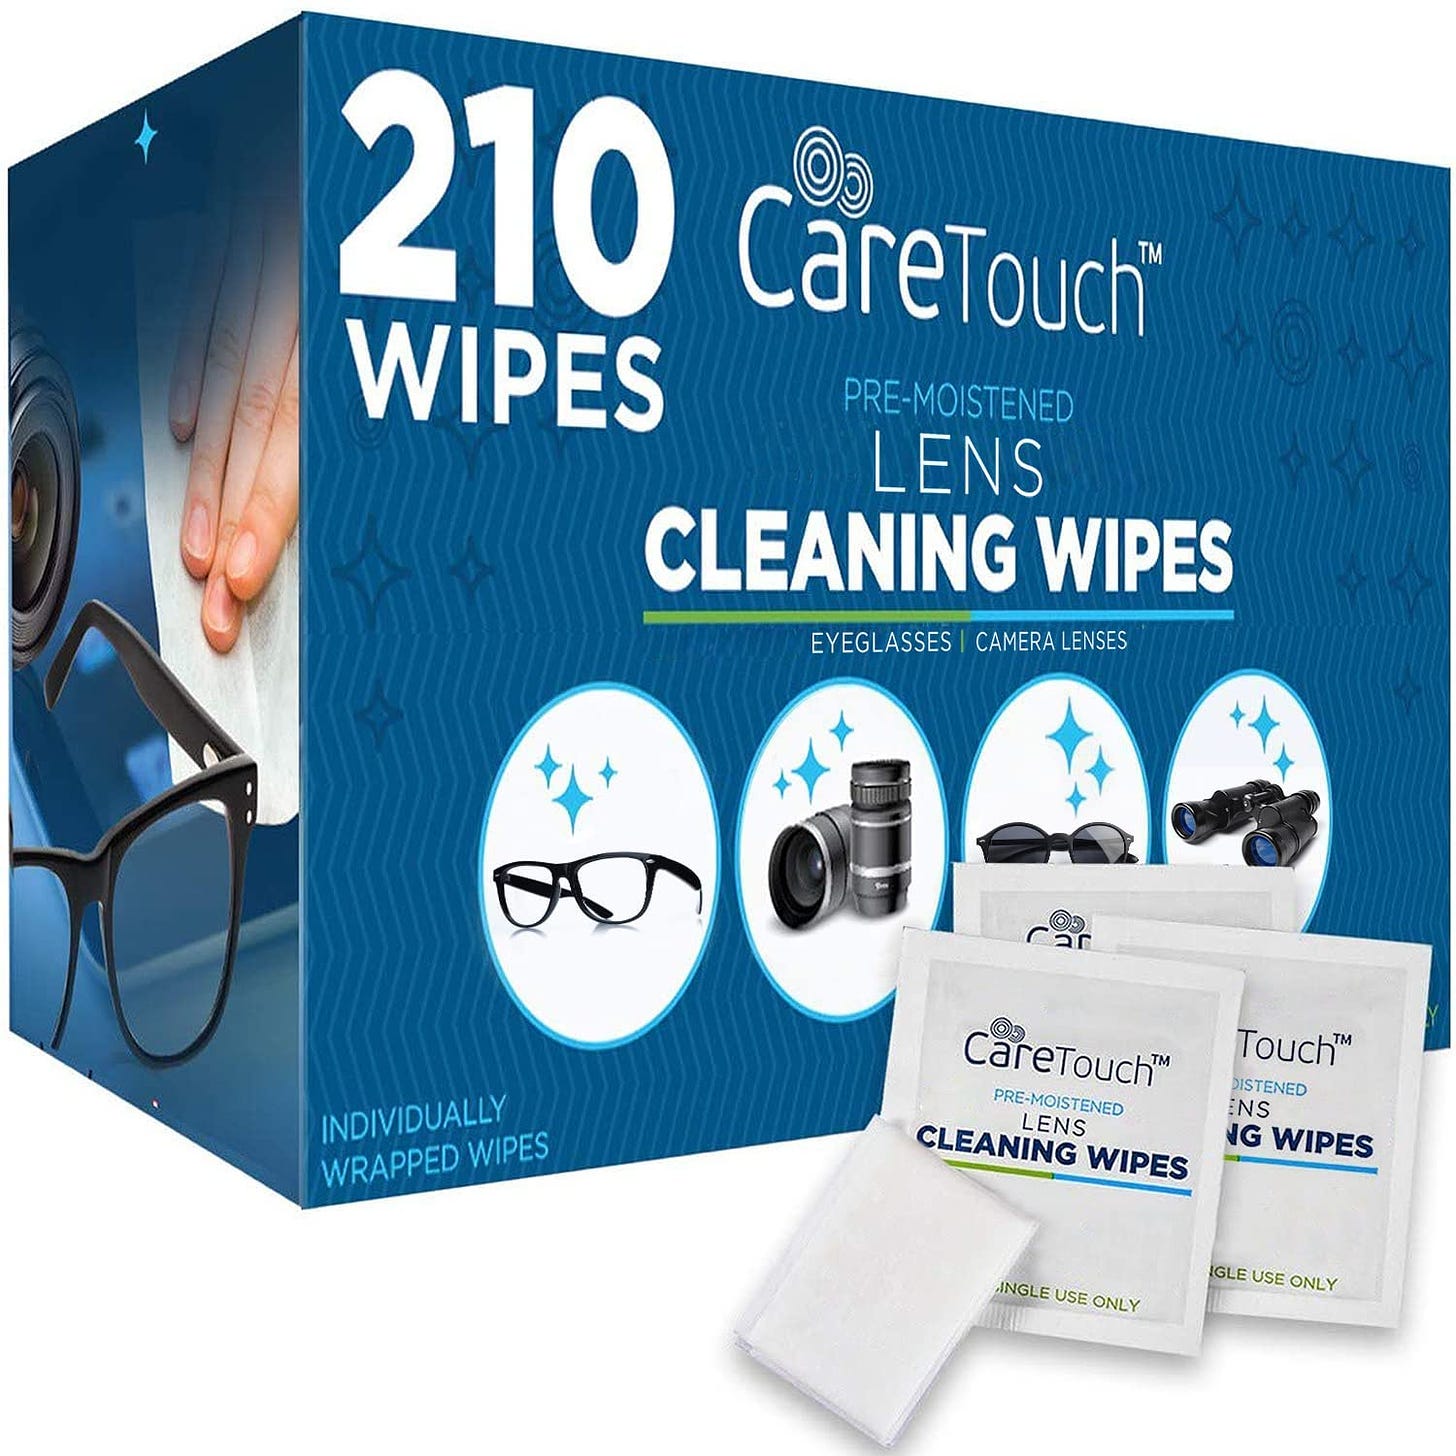 product image: box of 210 pre-moistened lens cleaning wips